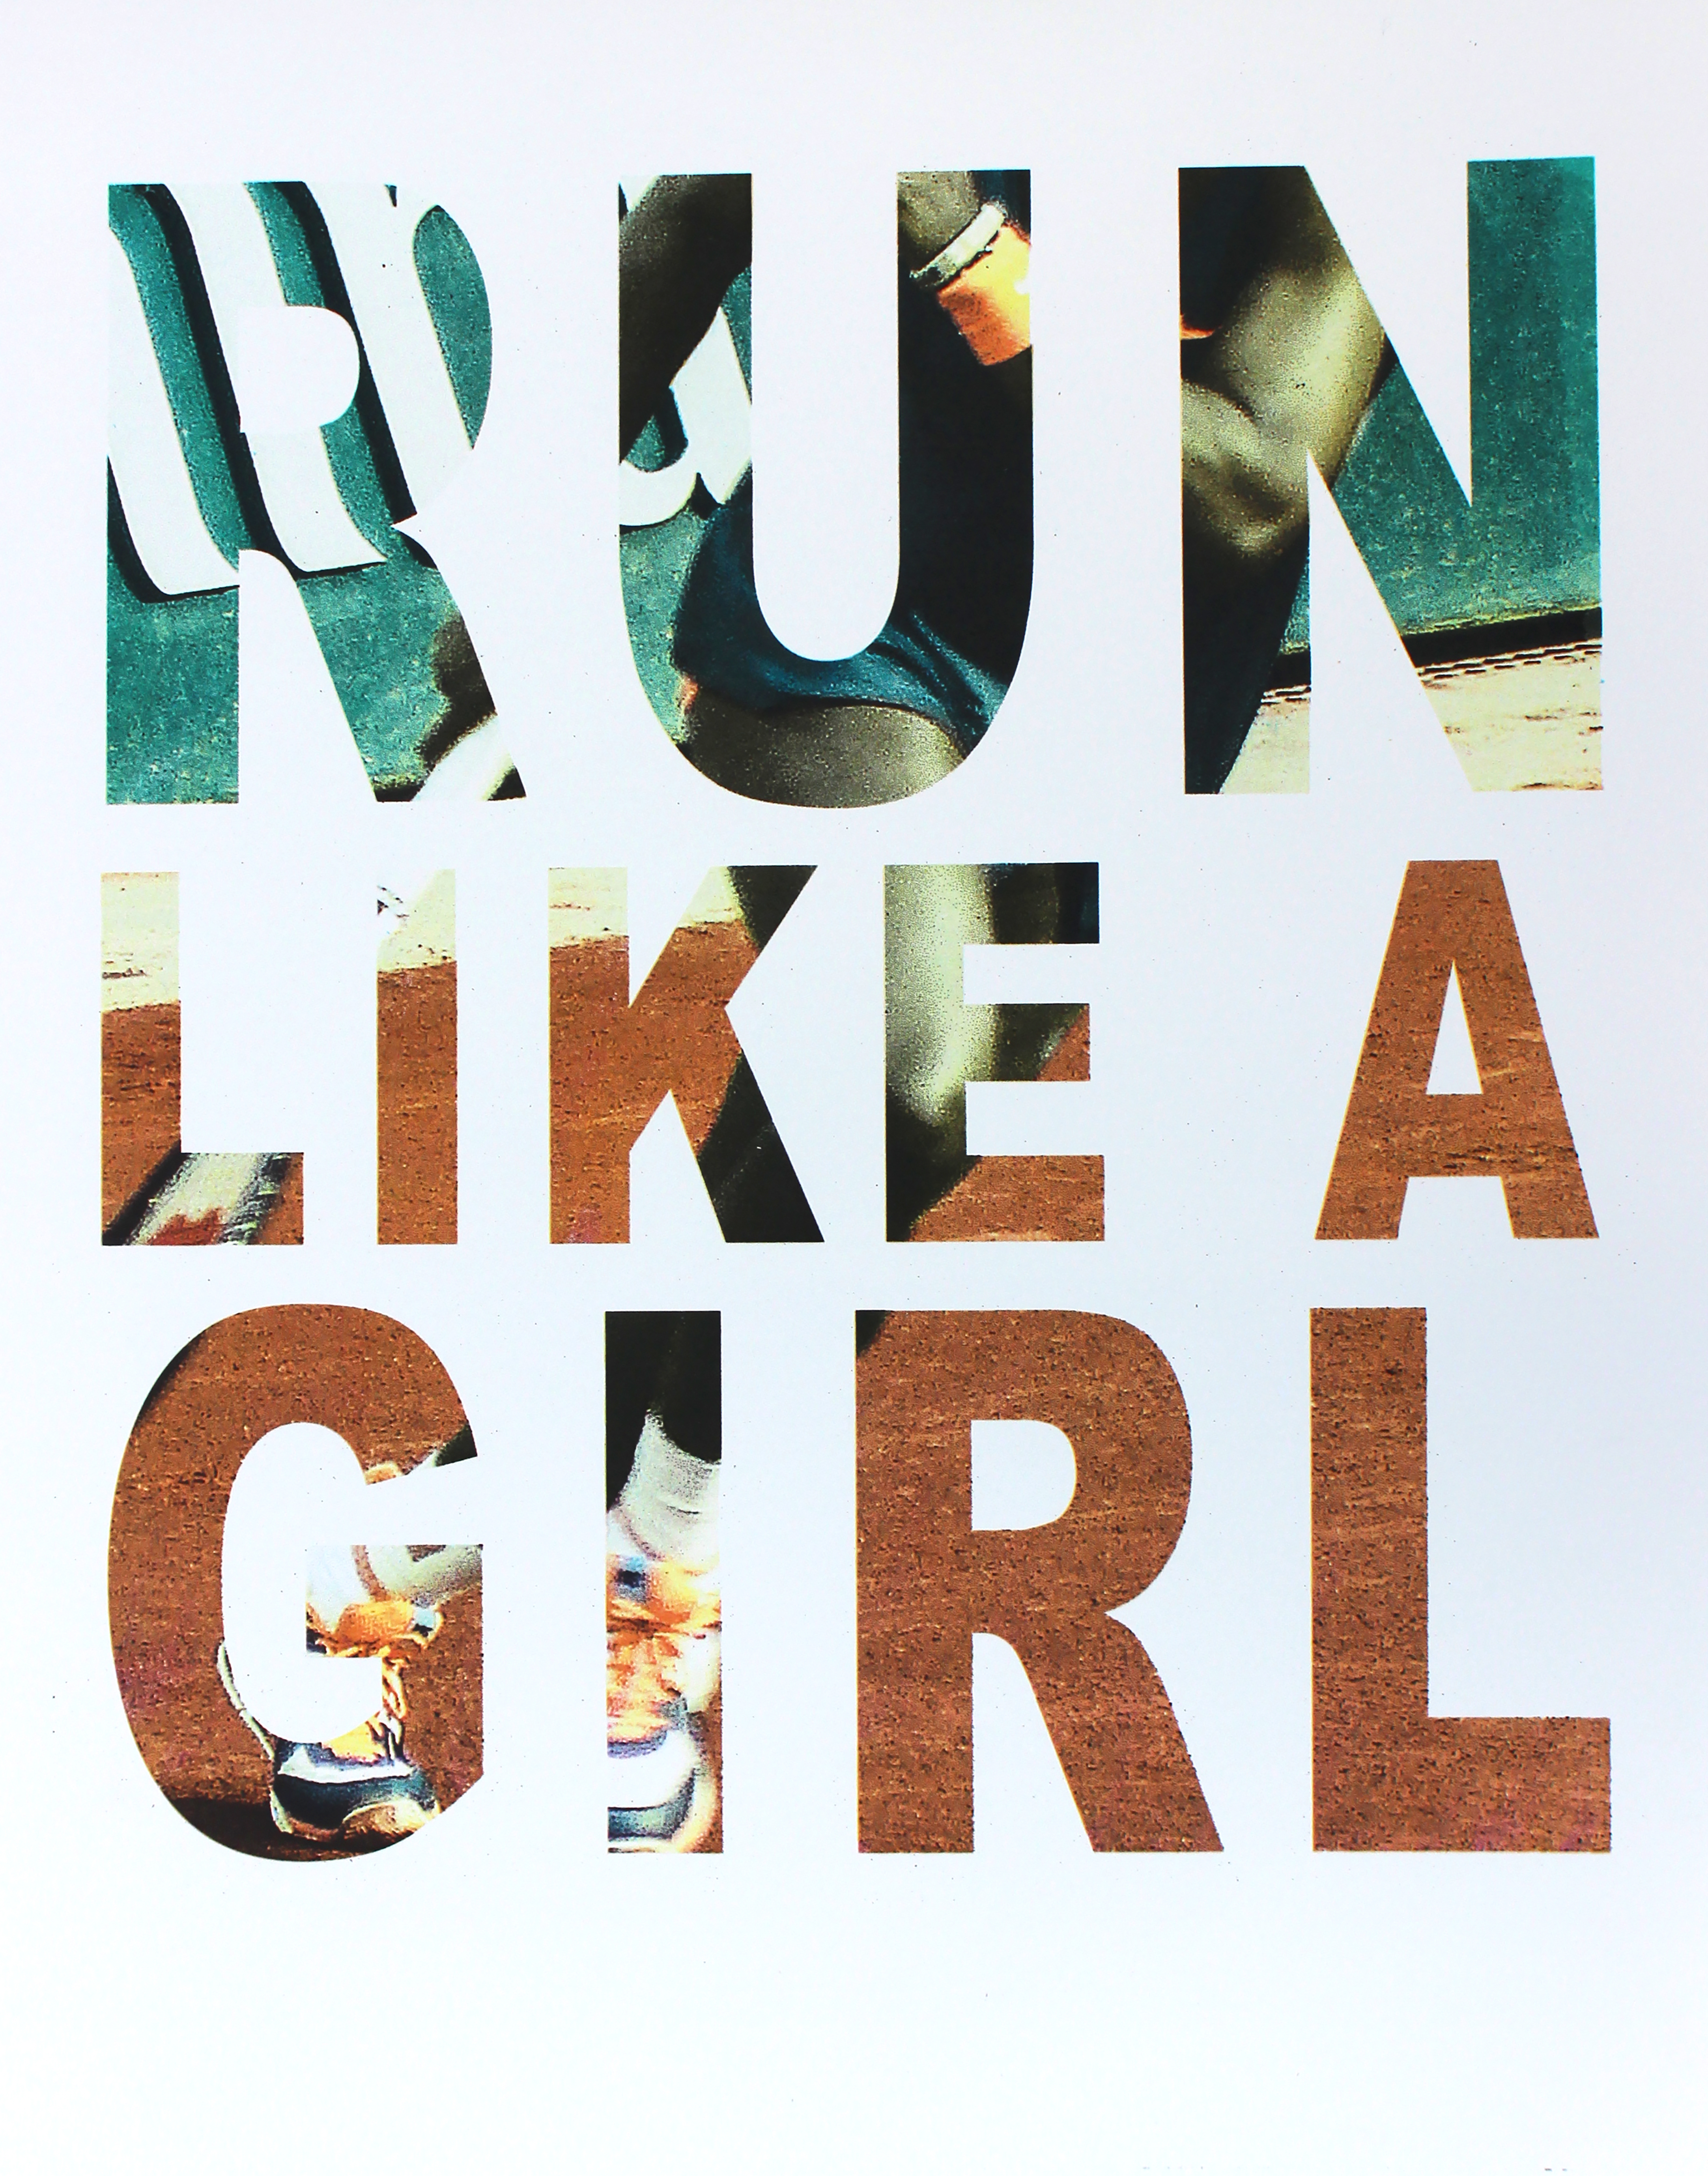 The words "run like a girl" are shows with the image of a woman of colour inside of the words